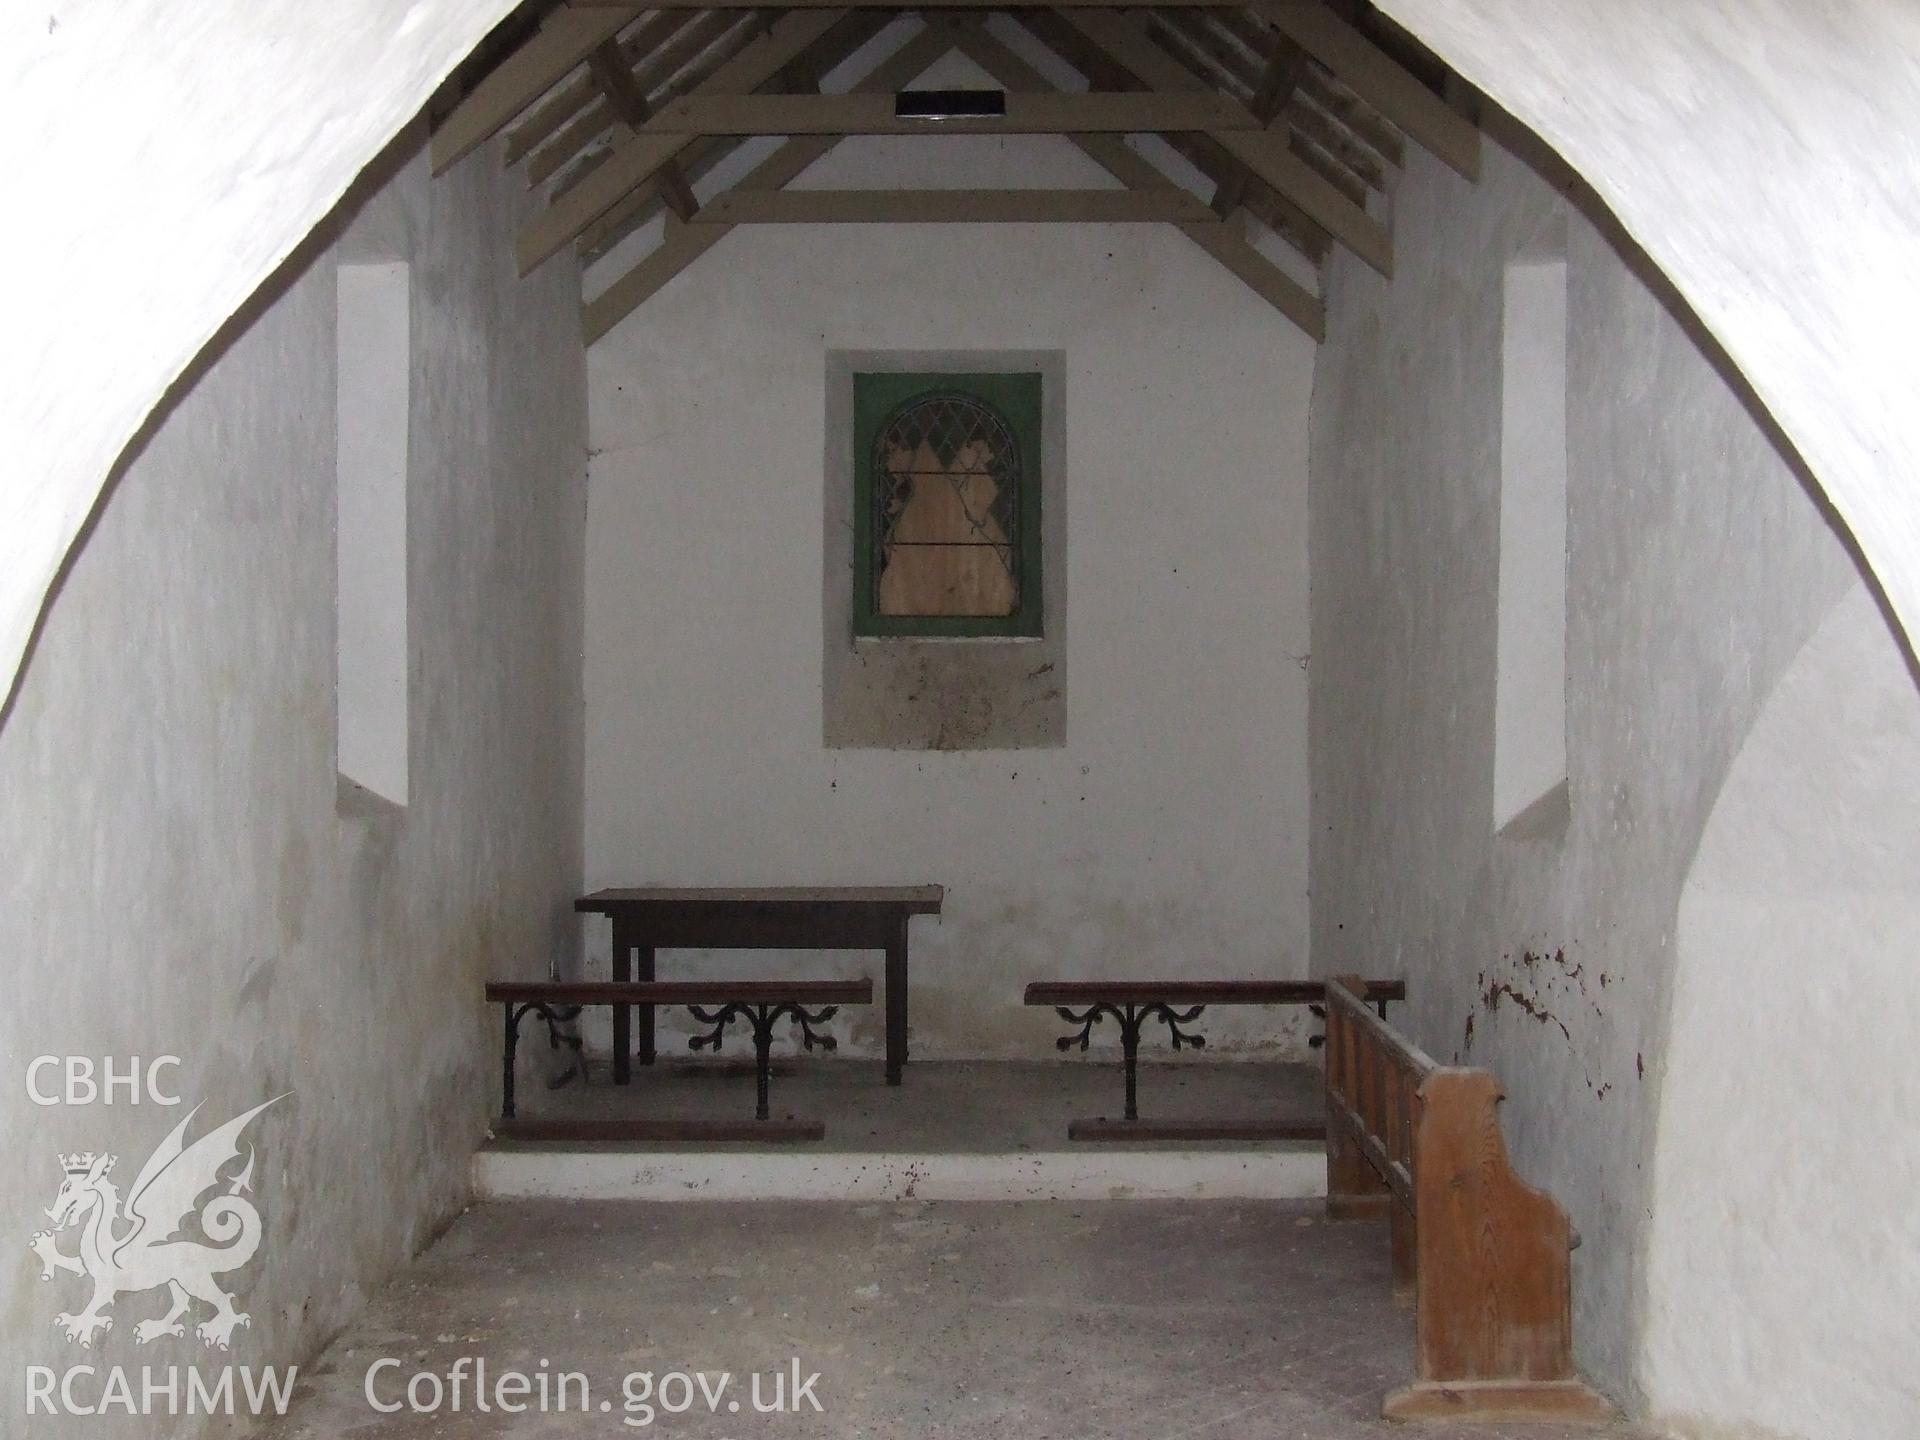 Digital colour photograph showing the chancel at St Justinian's Church, Llanstinian. Produced by Martin Davies in 2022.